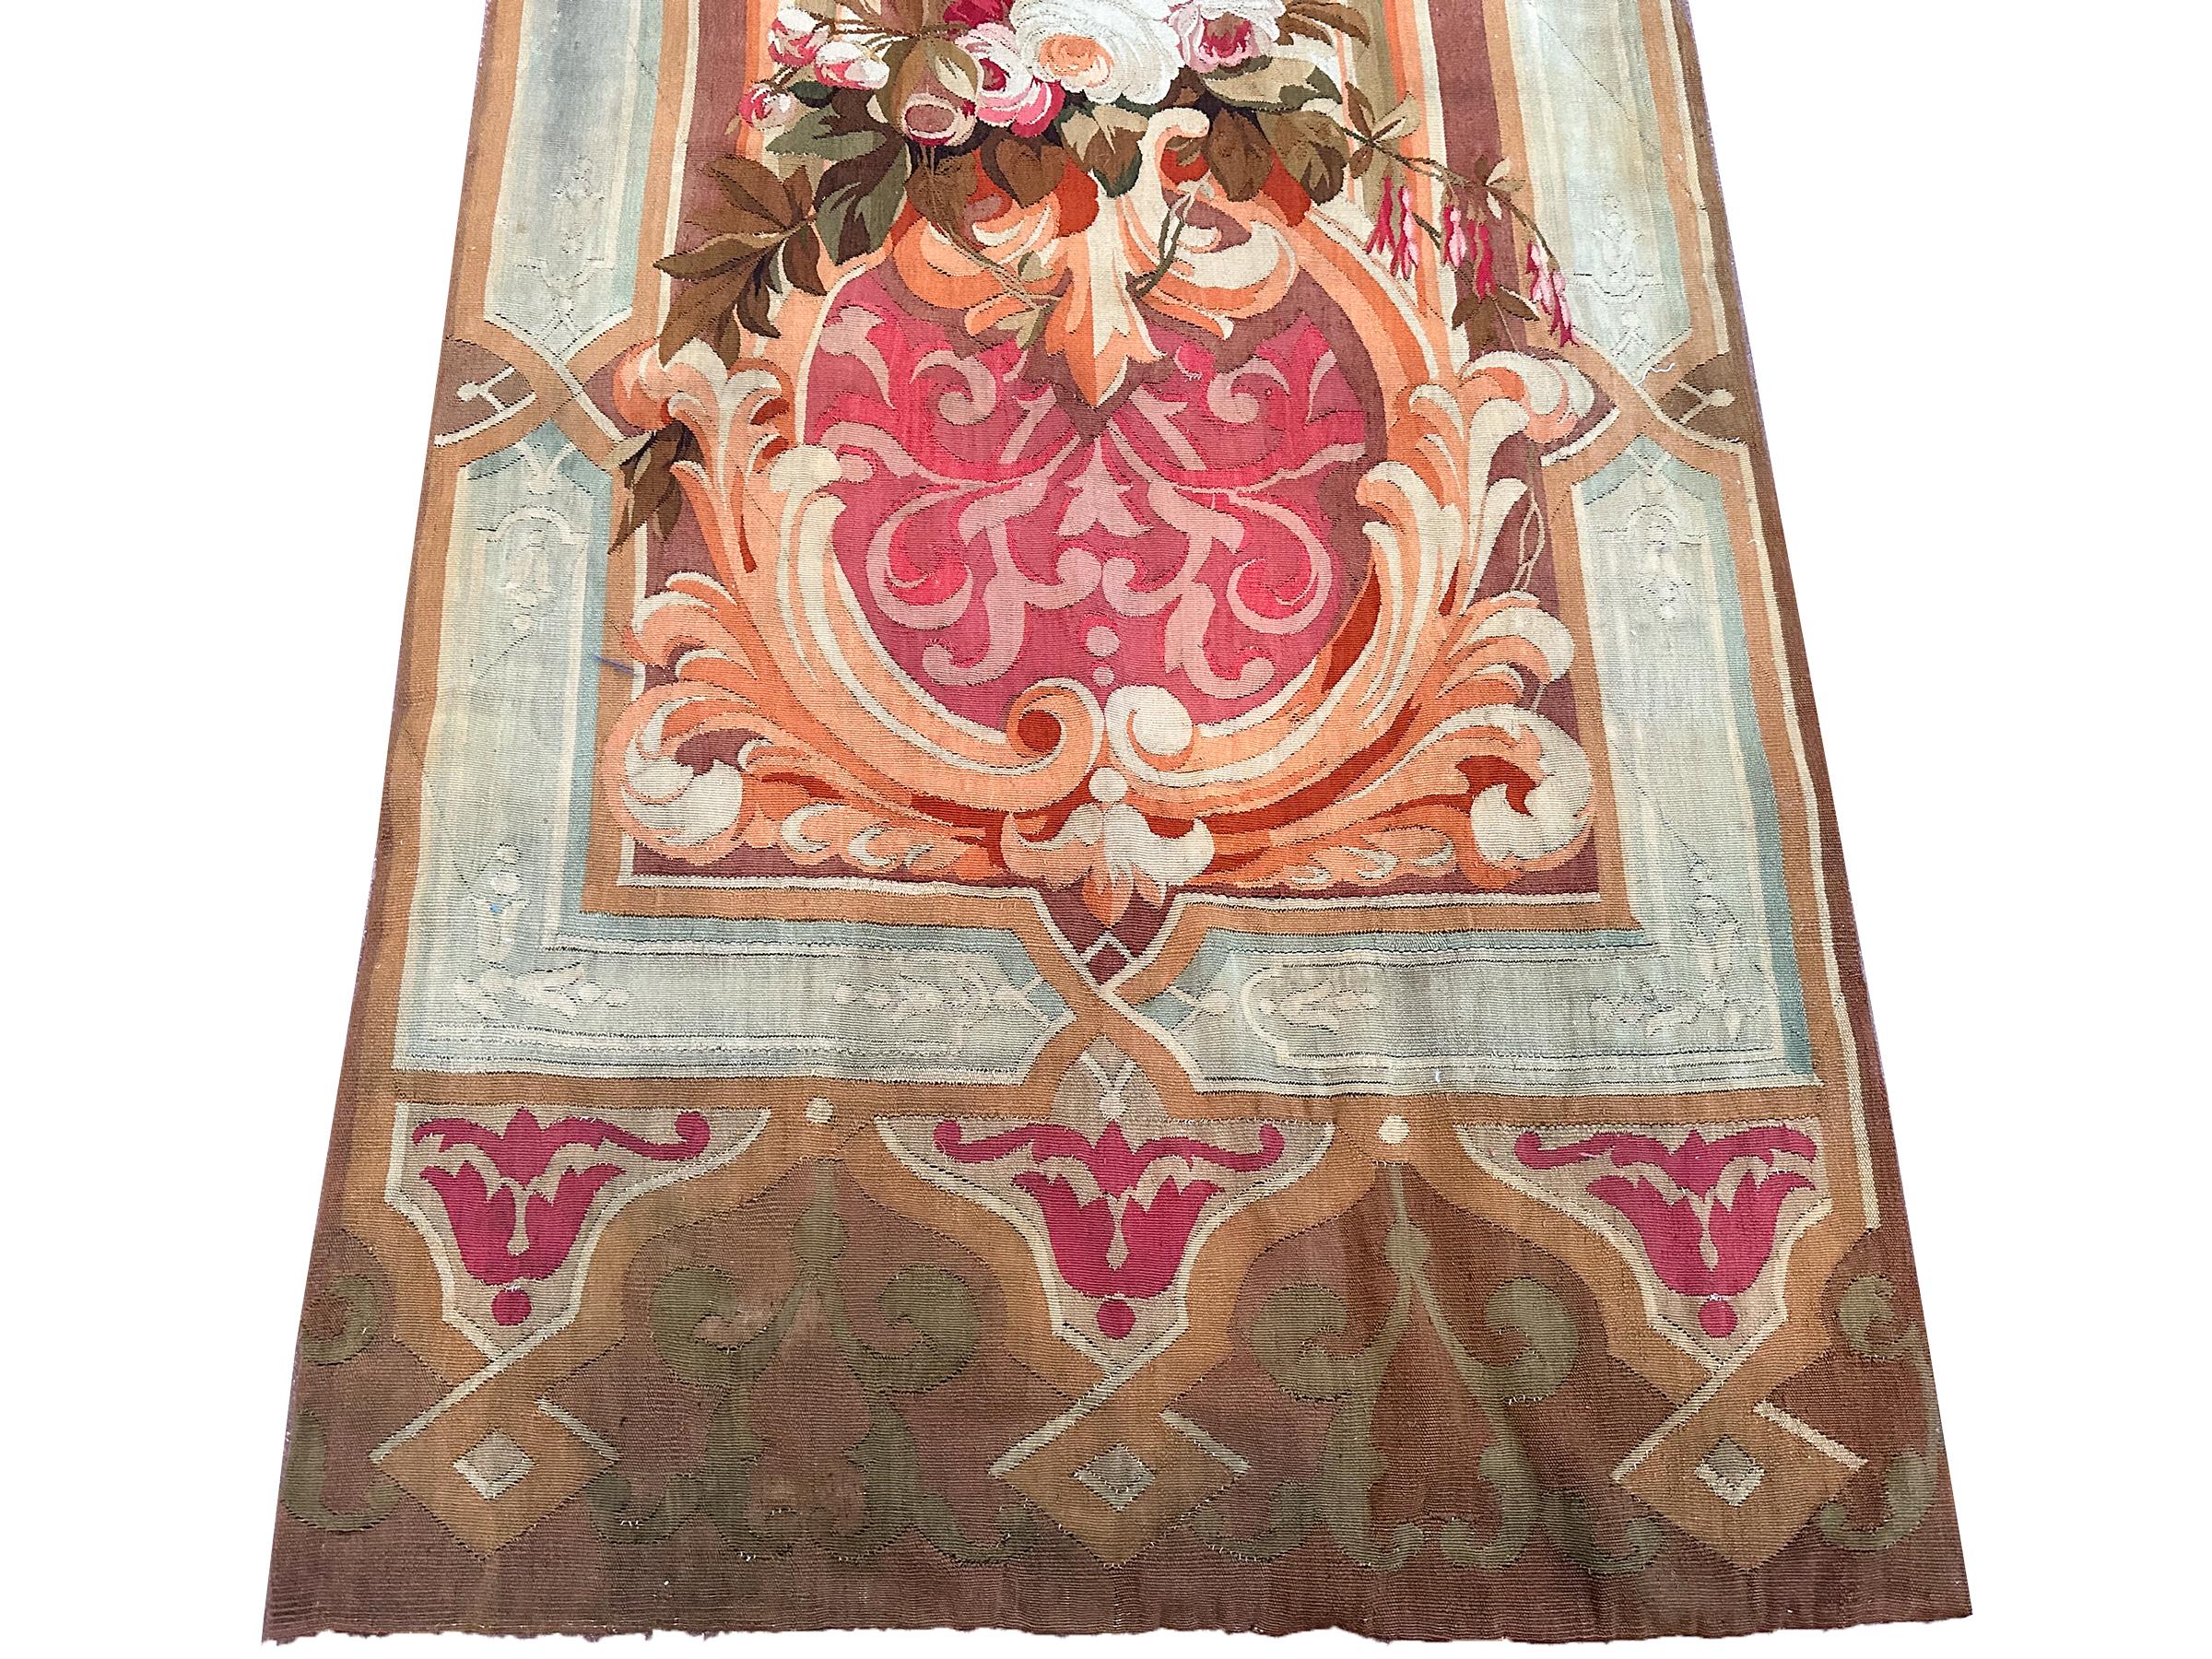 Wool 1920 Antique French Aubusson Tapestry Rug Floral Vase Runner 3x10 1880 97x287cm For Sale